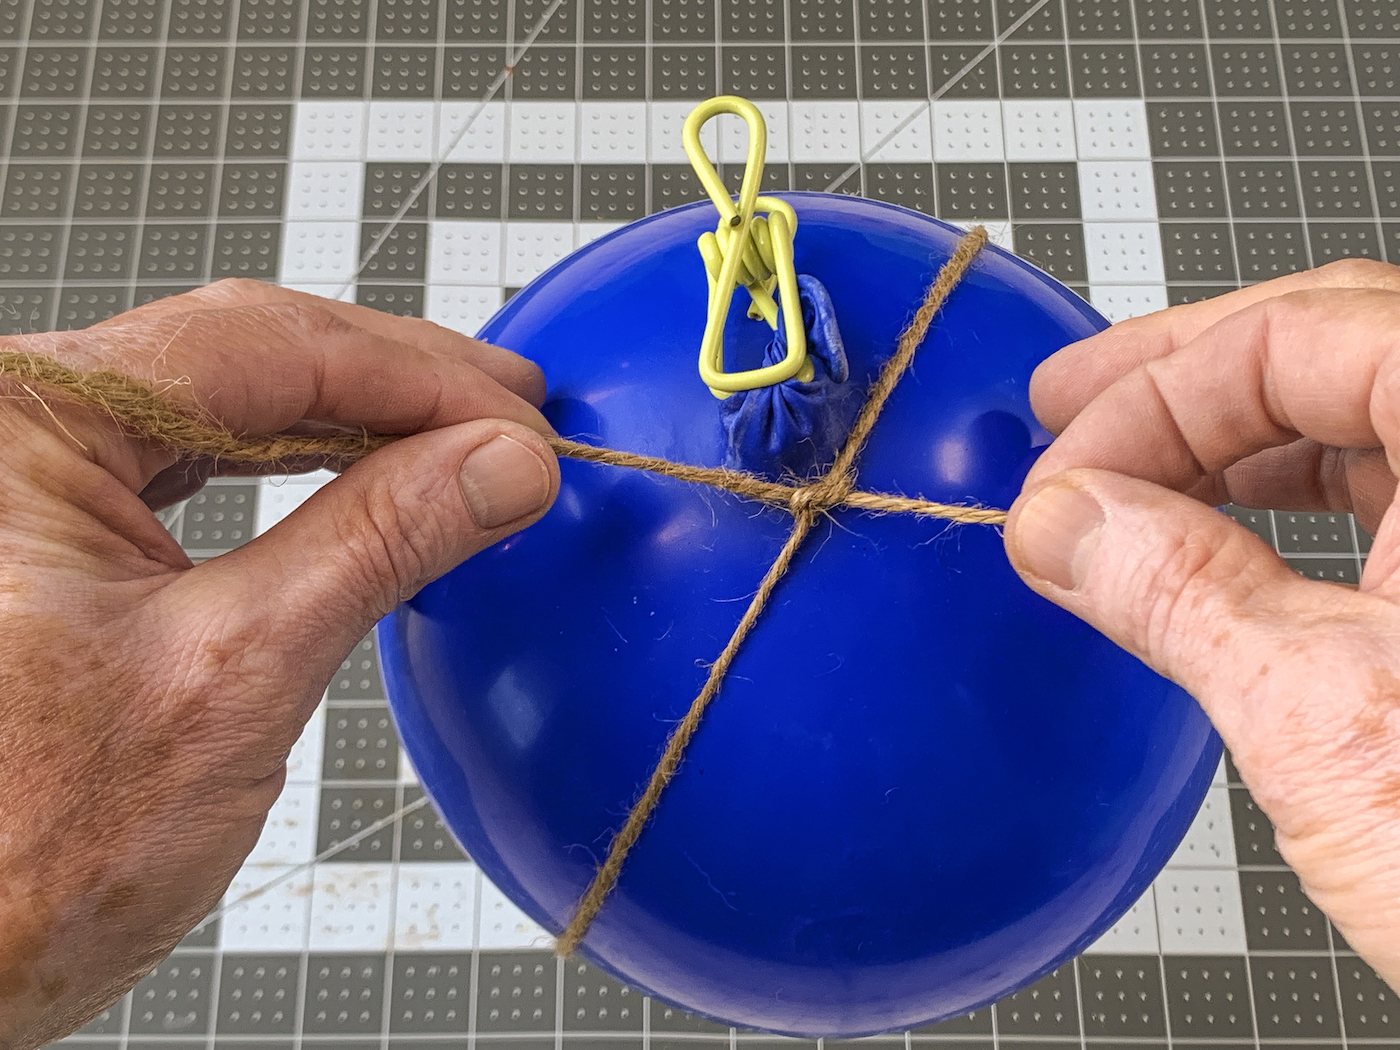 Tying a loop of twine around the balloon